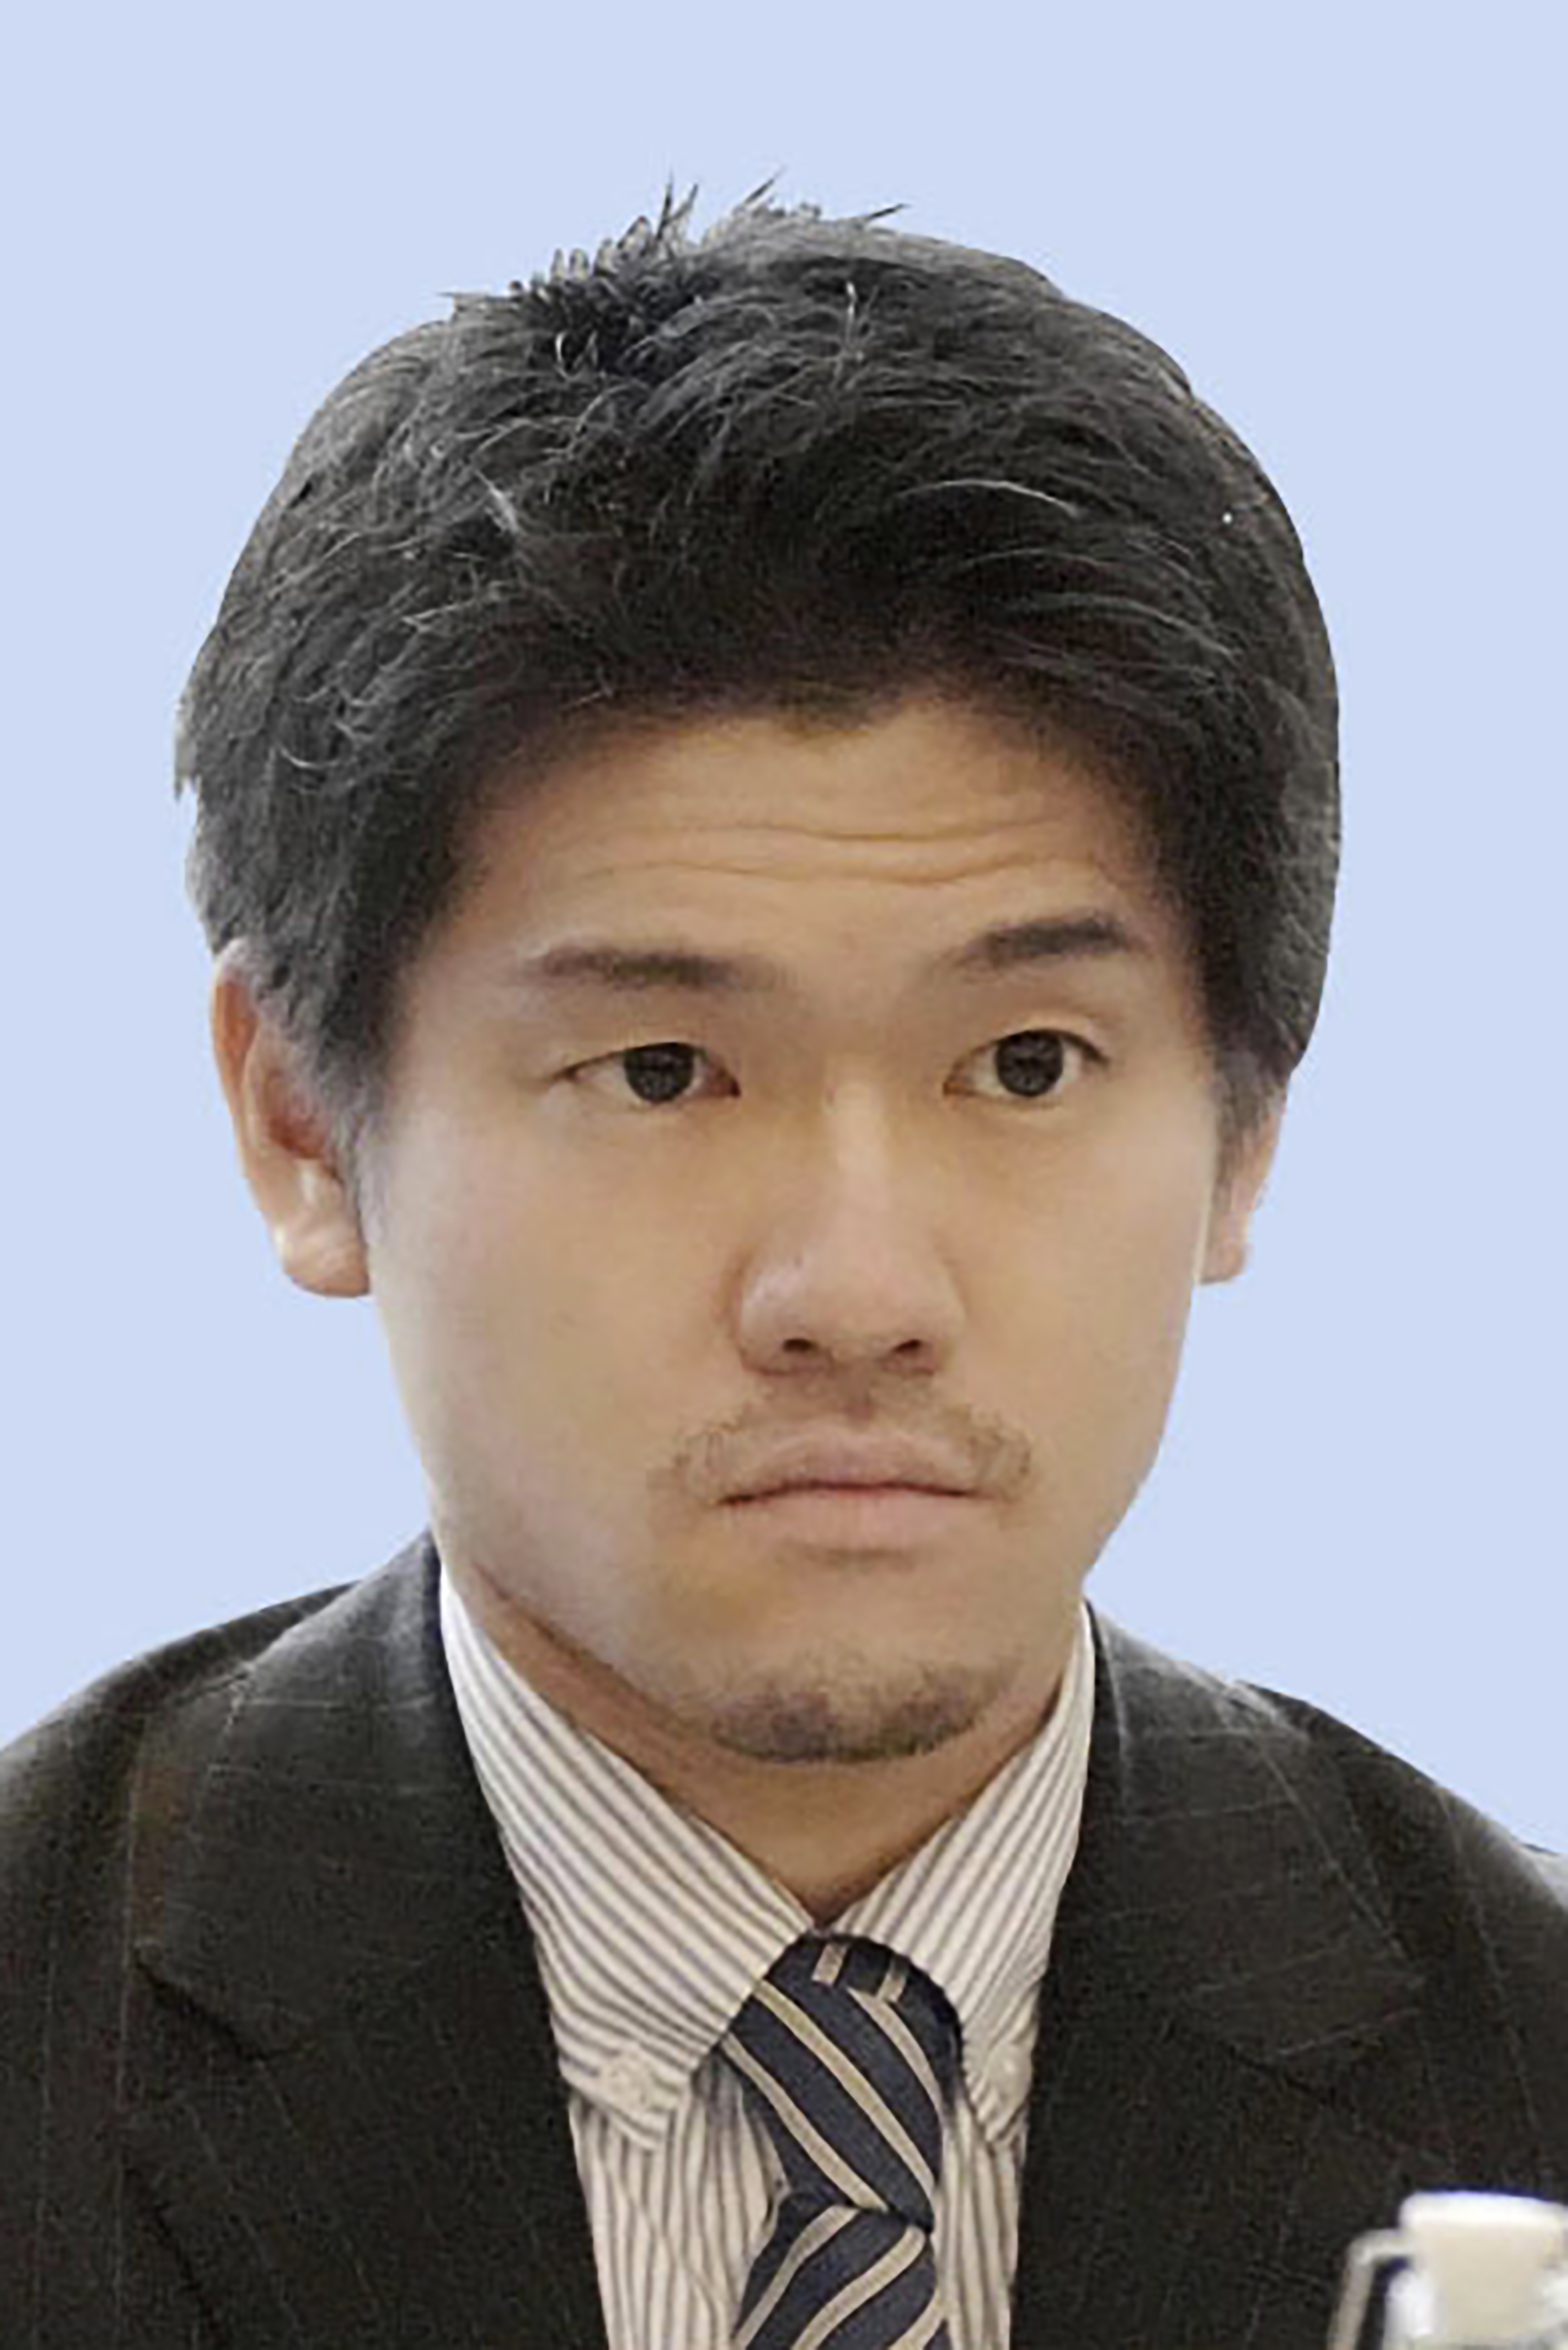 A headshot of a young Japanese man in a suit and tie looking serious against a blue background.